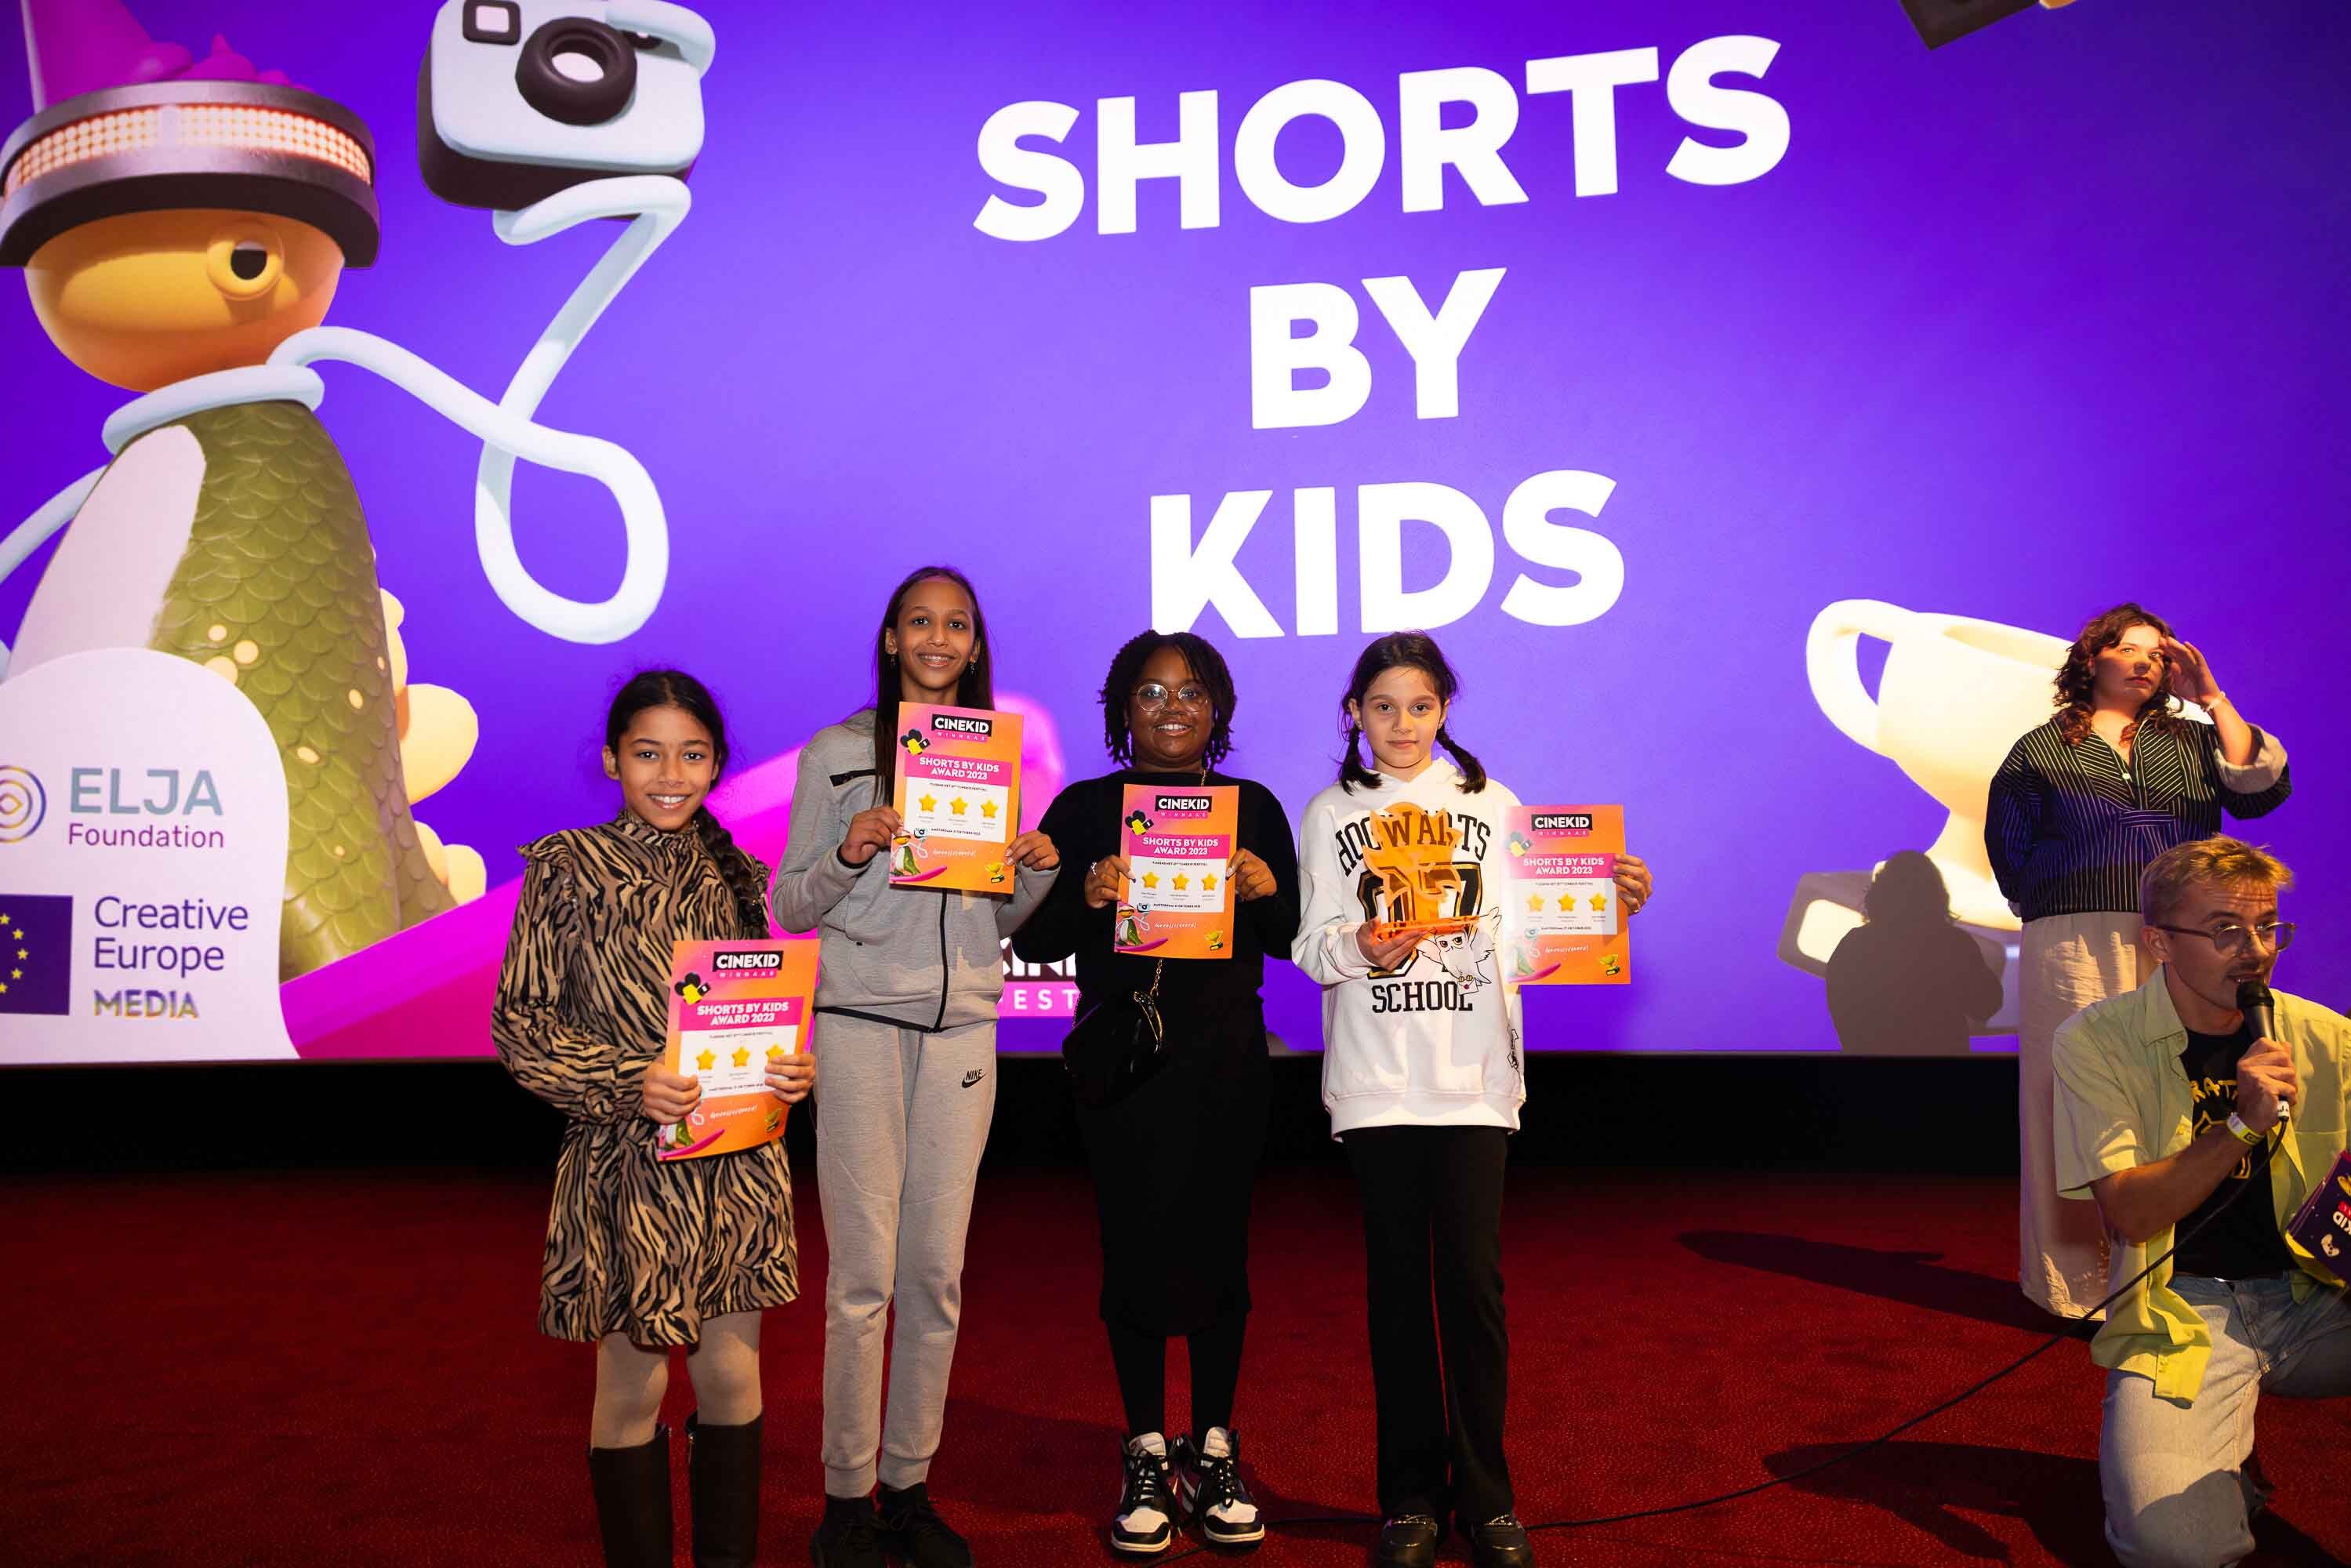 Shorts by Kids